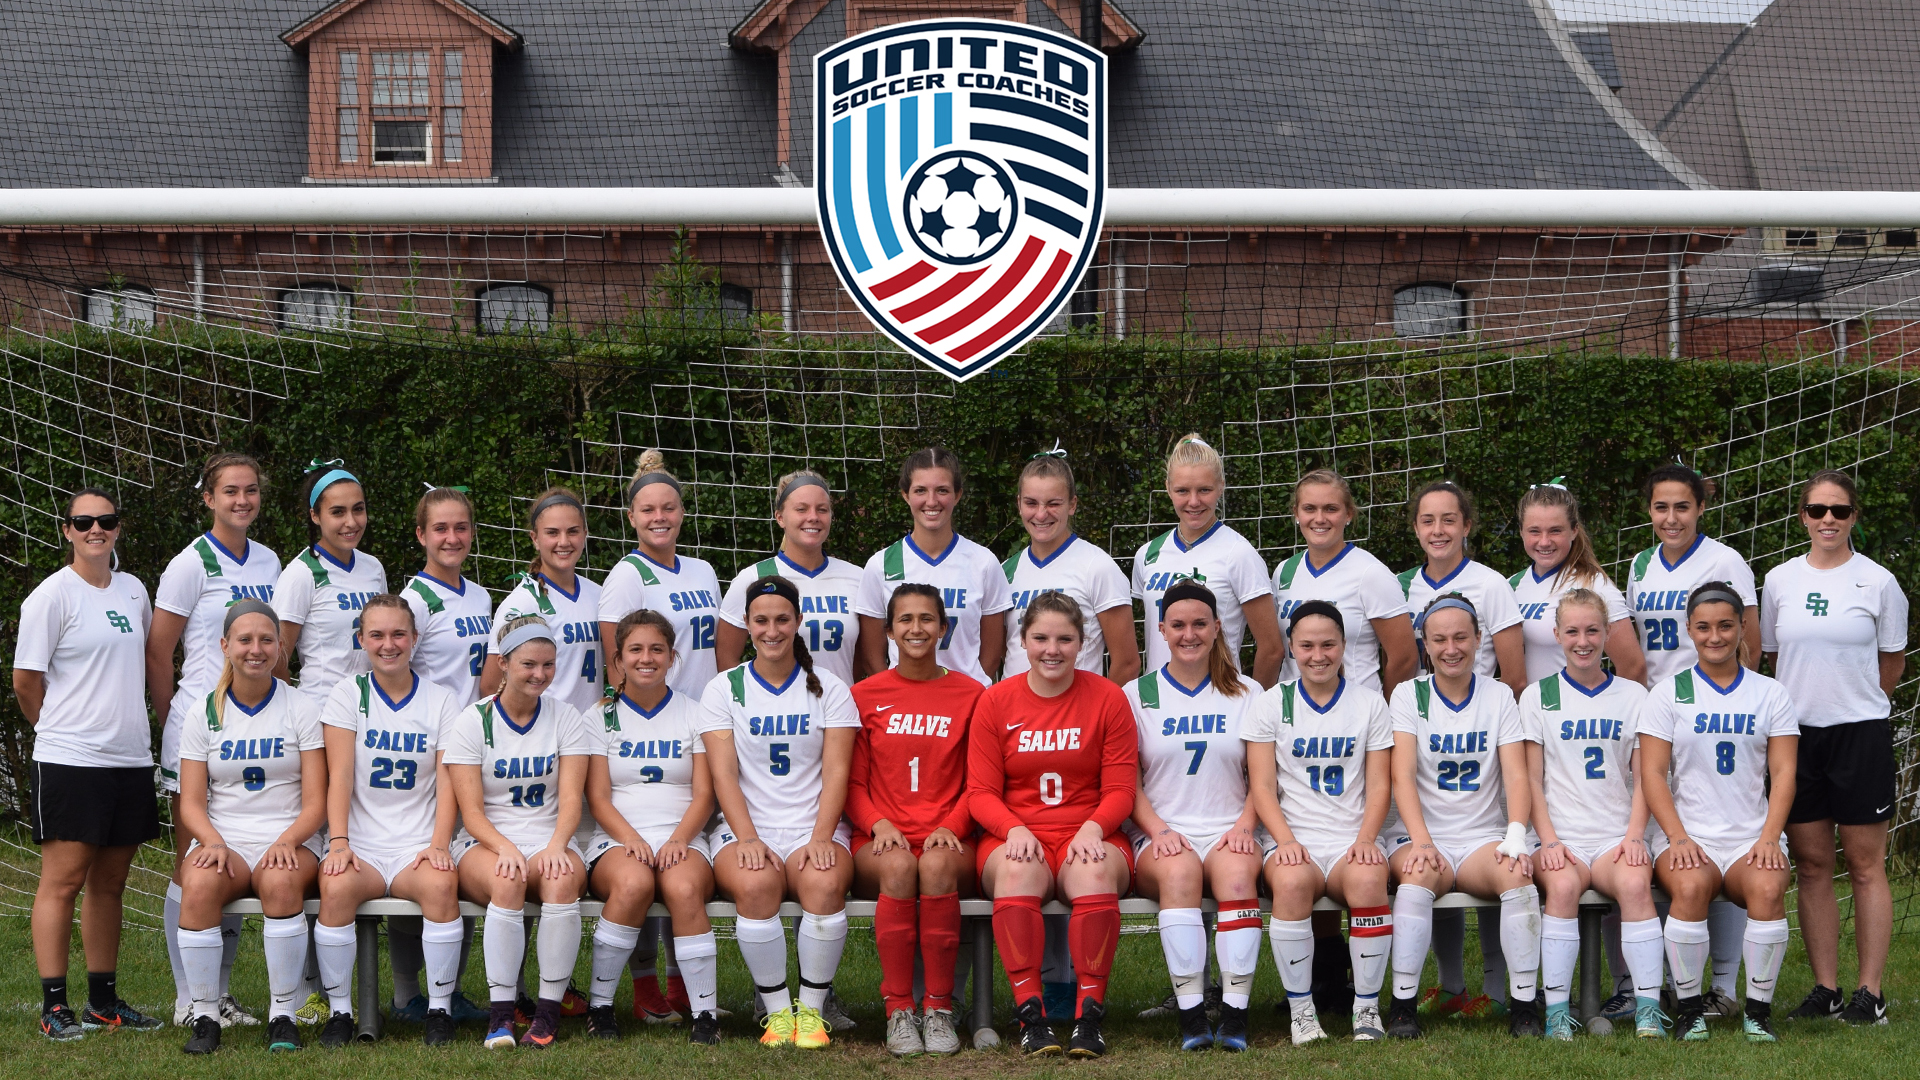 Salve Regina University women's soccer team has been announced as recipient of the United Soccer Coaches Team Academic Award for the previous (2017-18) academic year.